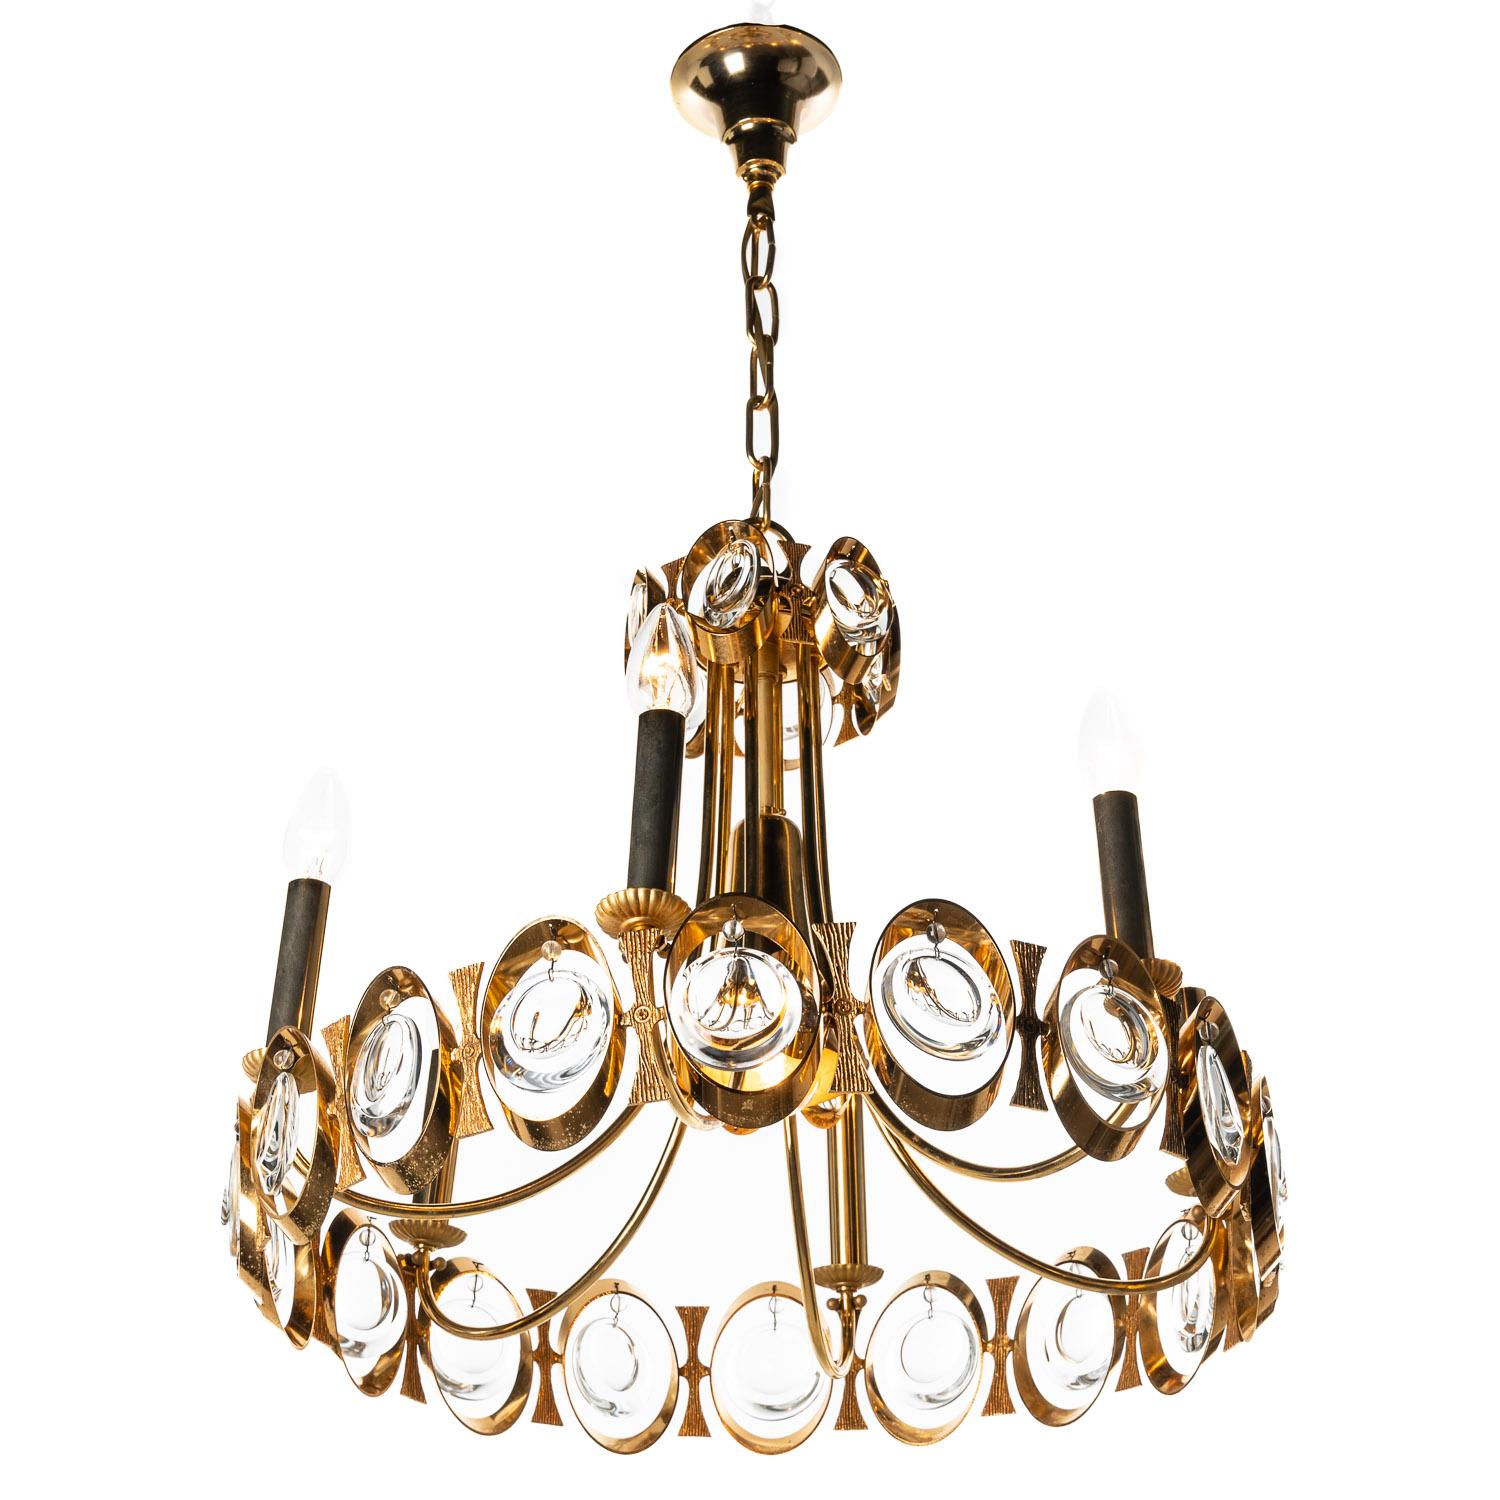 This is a stunning examples of a 1960s Palwa piece, the opulent blend of crystal glass and gilt-brass make this a truly special. The seven-light arrangement illuminates the crystal glass work in a way that grabs the attention. 